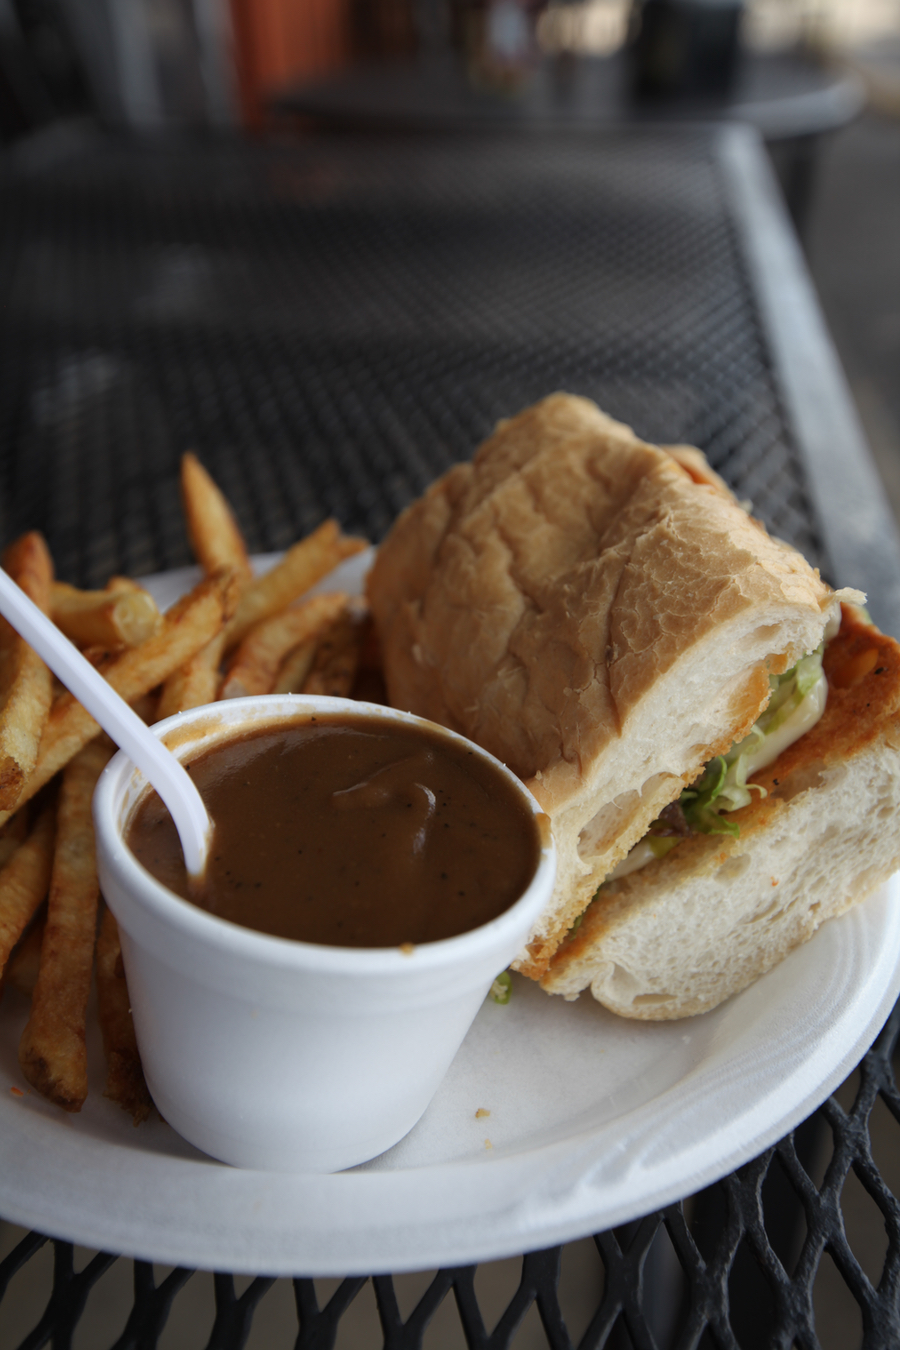 A photograph of a po' boy sandwich accompanied by a cup of dark brown gravy and fries